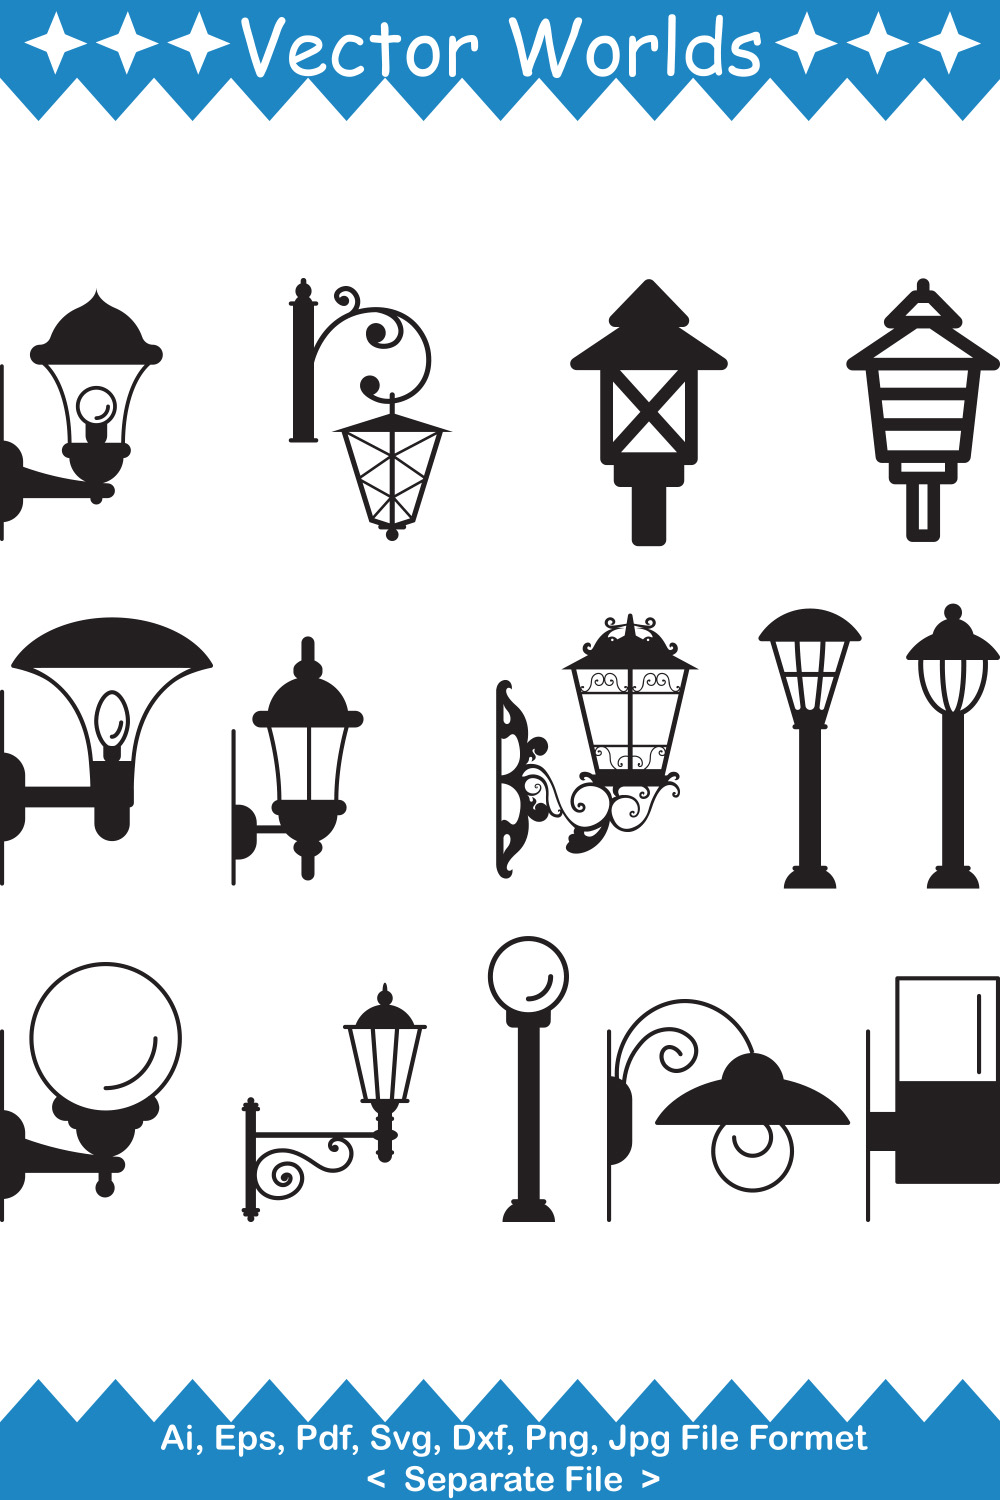 Bundle of vector gorgeous images of garden lamps silhouettes.